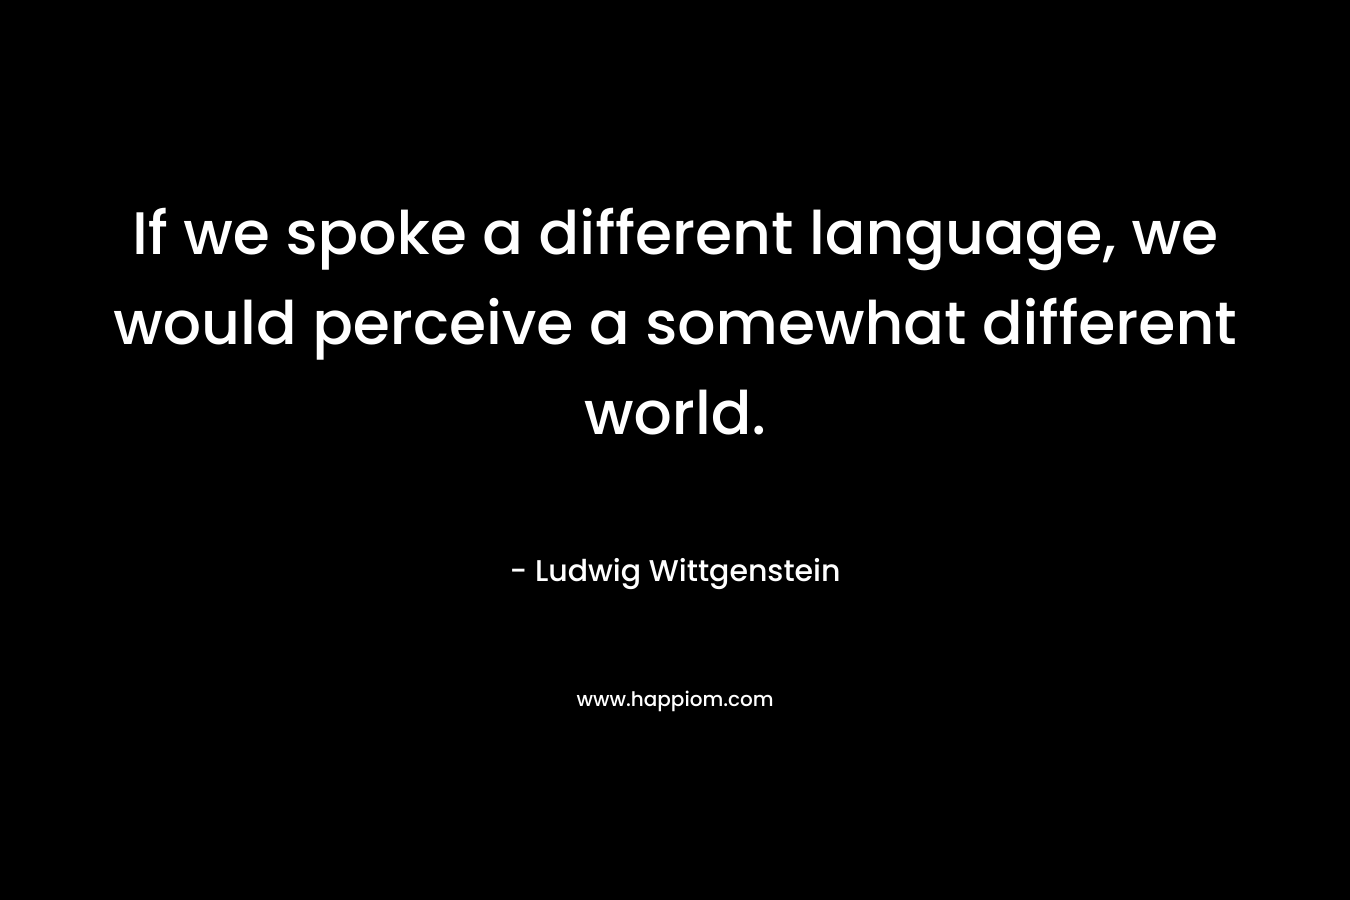 If we spoke a different language, we would perceive a somewhat different world.